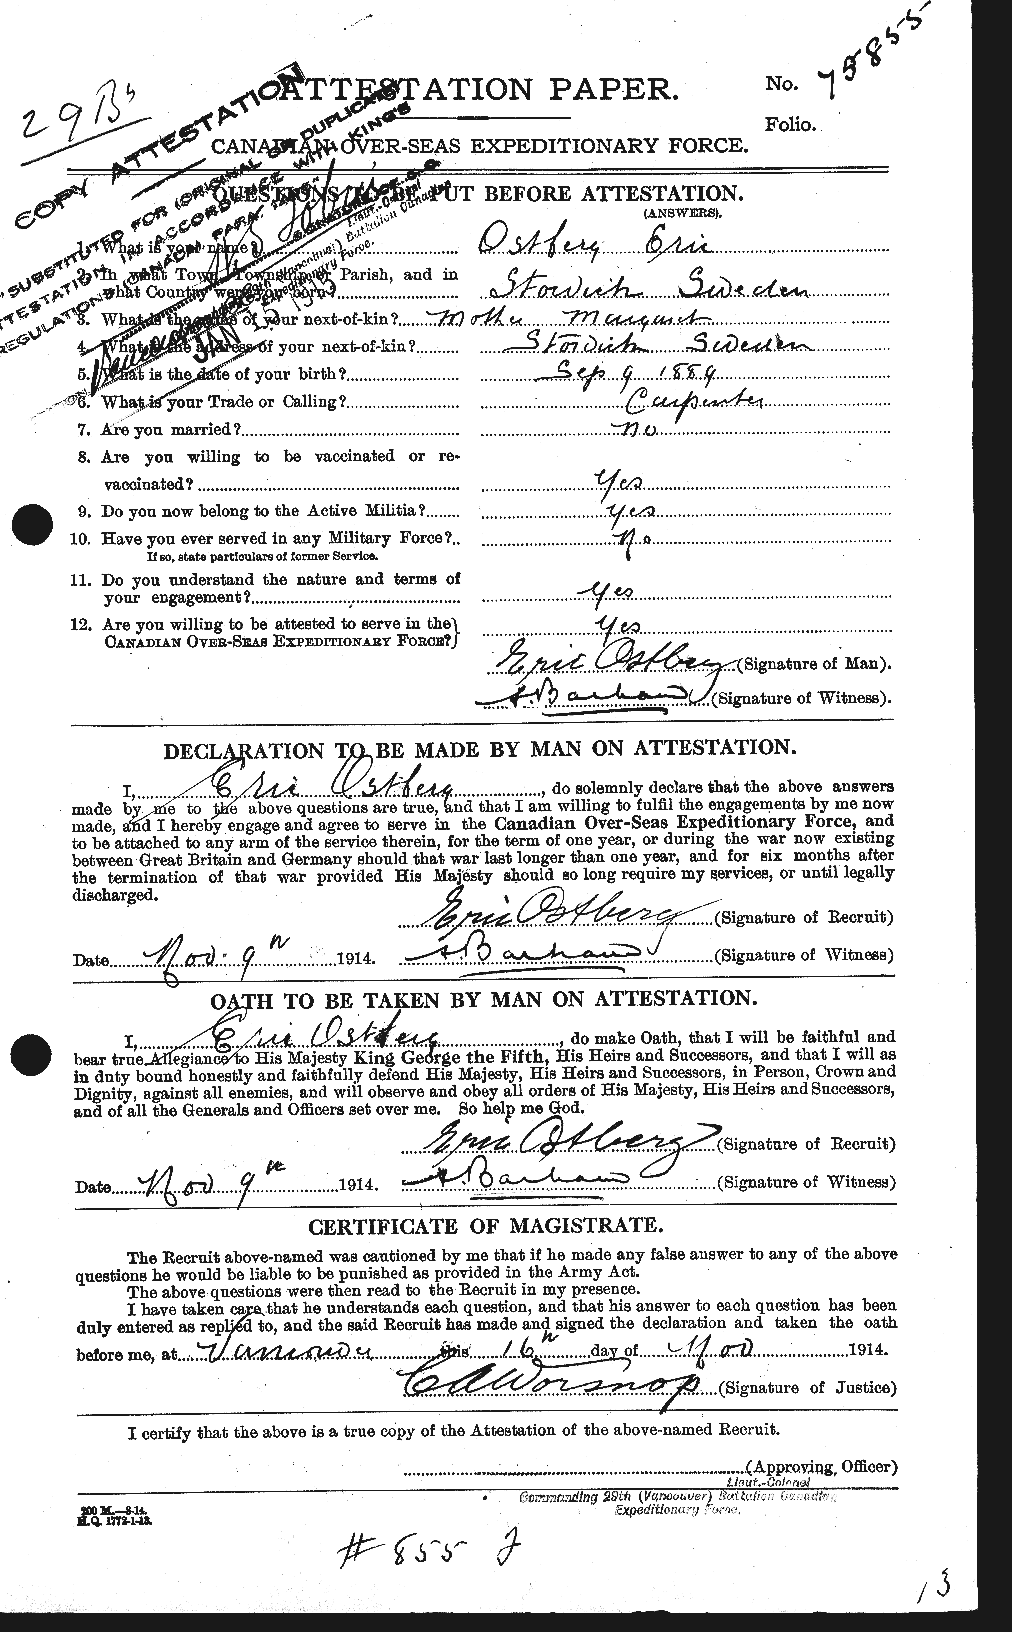 Personnel Records of the First World War - CEF 560167a